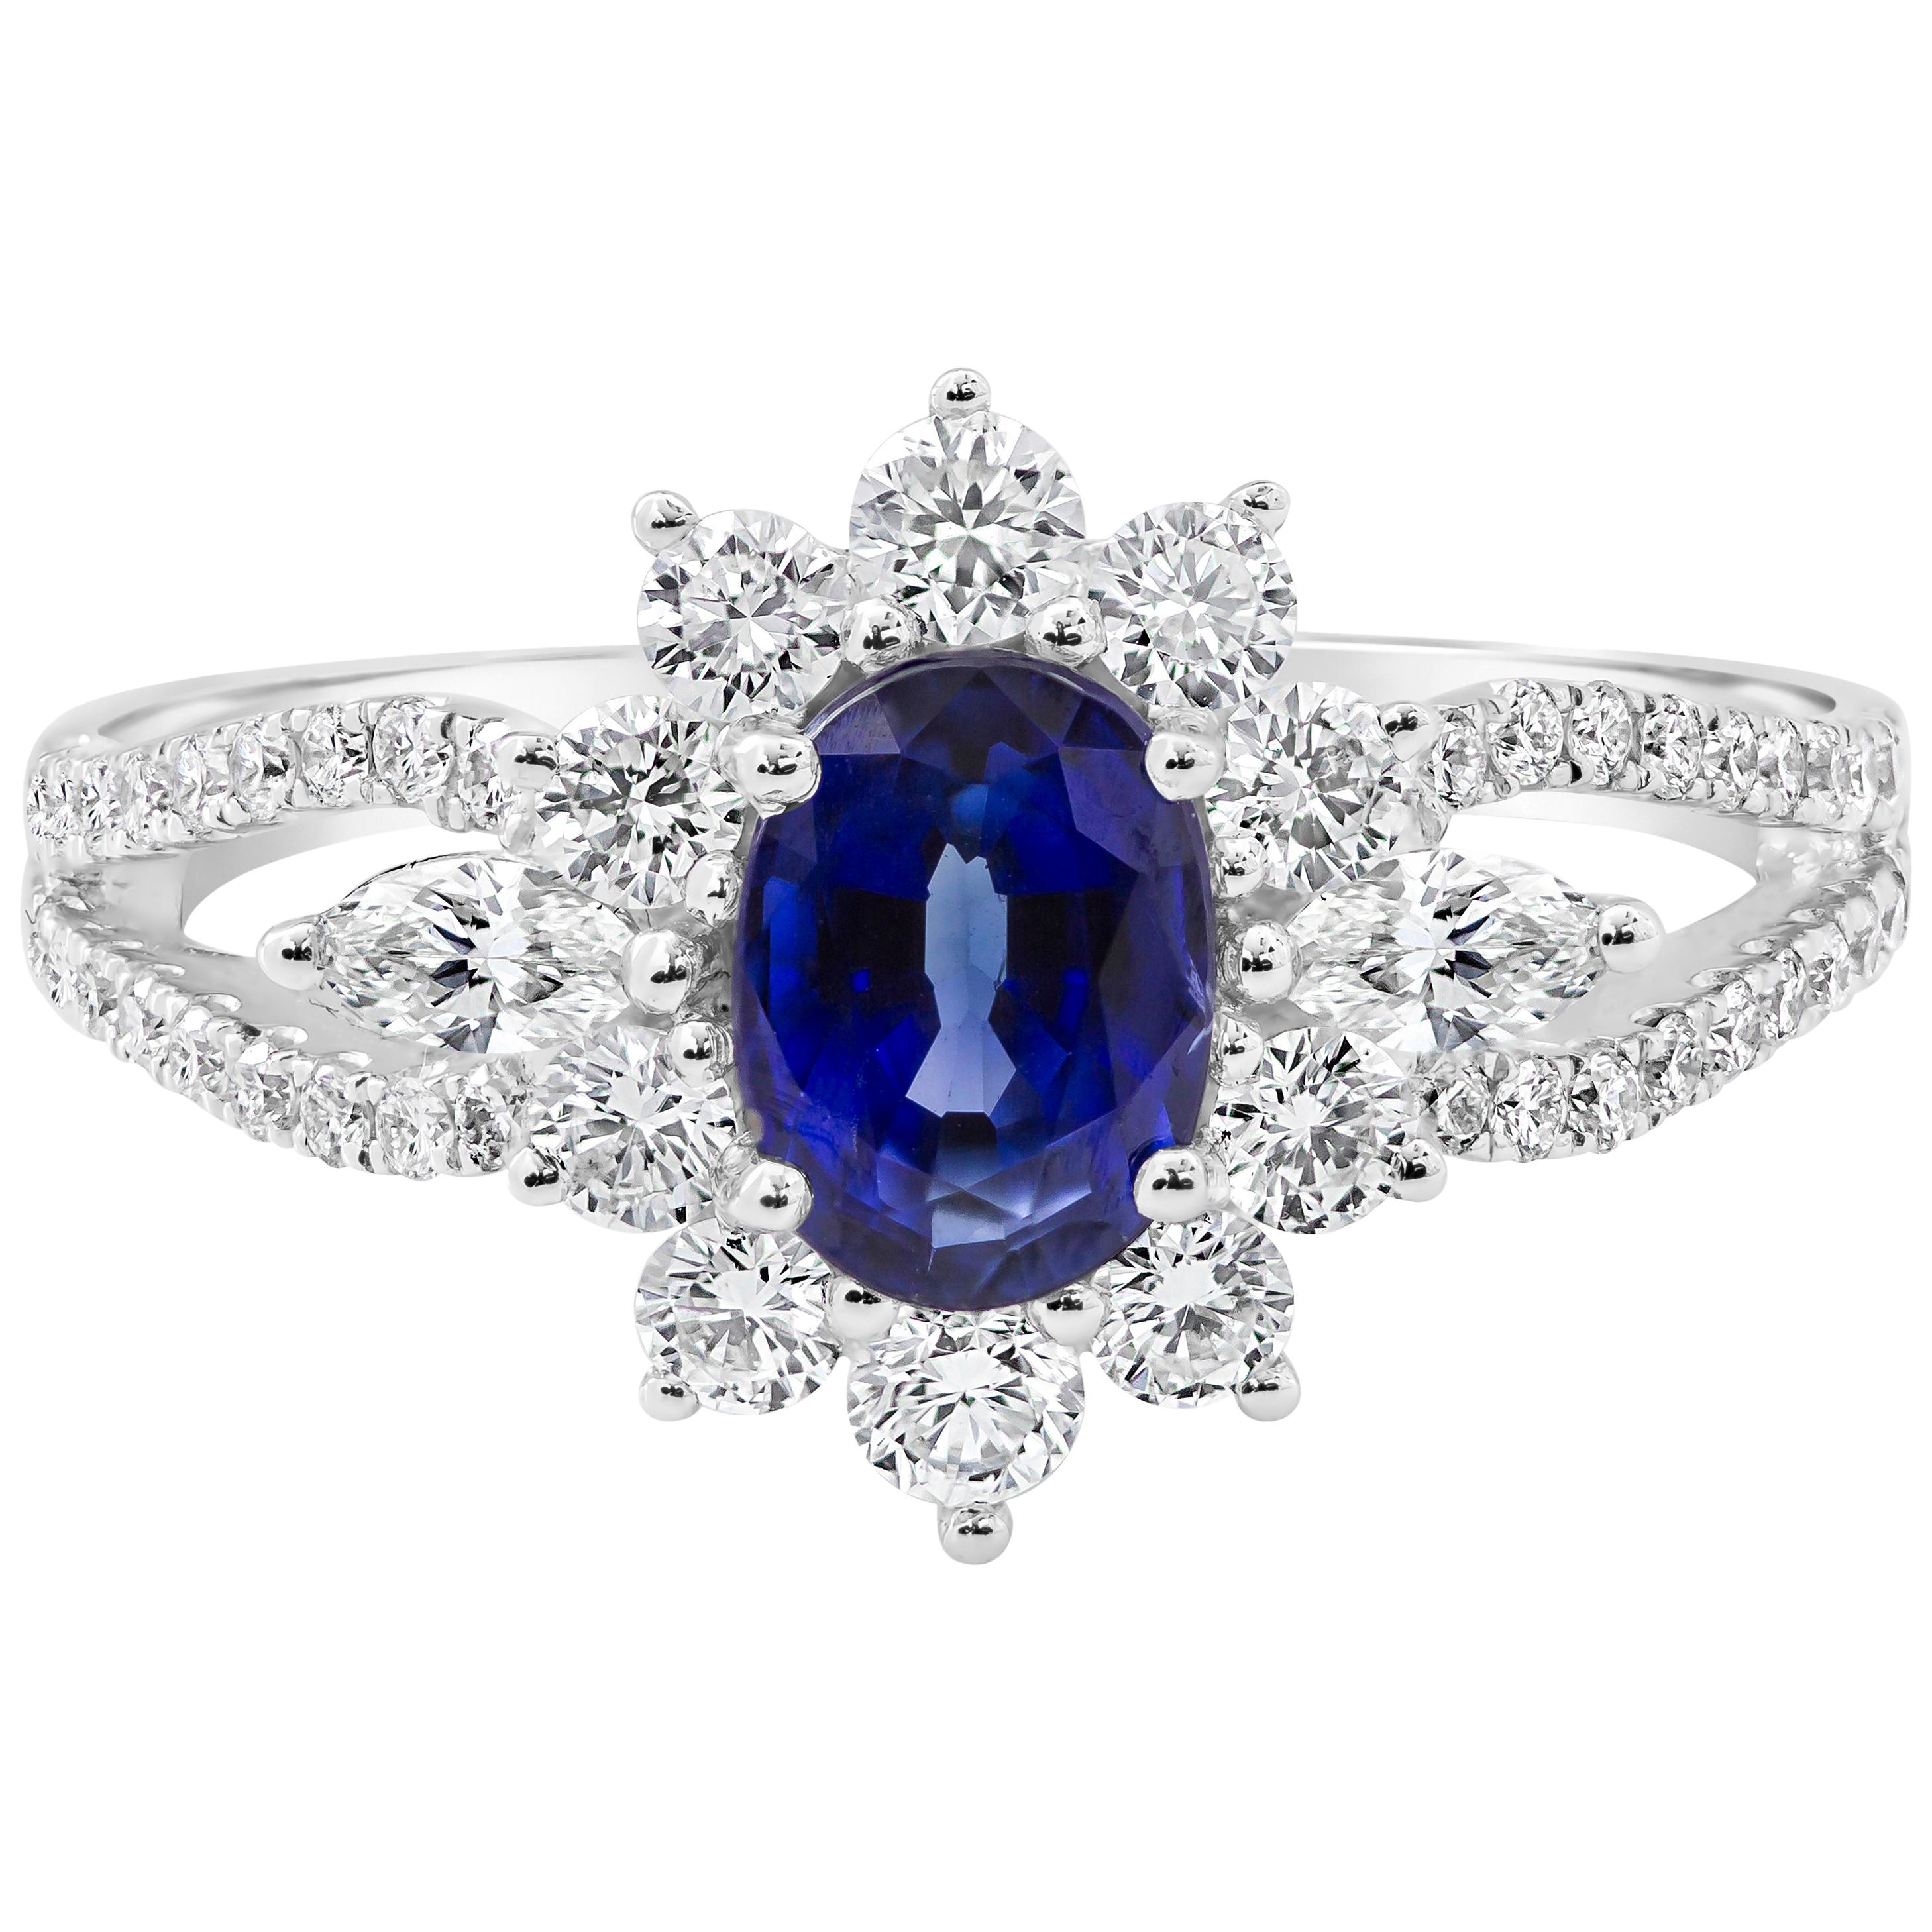 Roman Malakov 1.23 Carat Oval Cut Blue Sapphire and Diamond Halo Engagement Ring For Sale